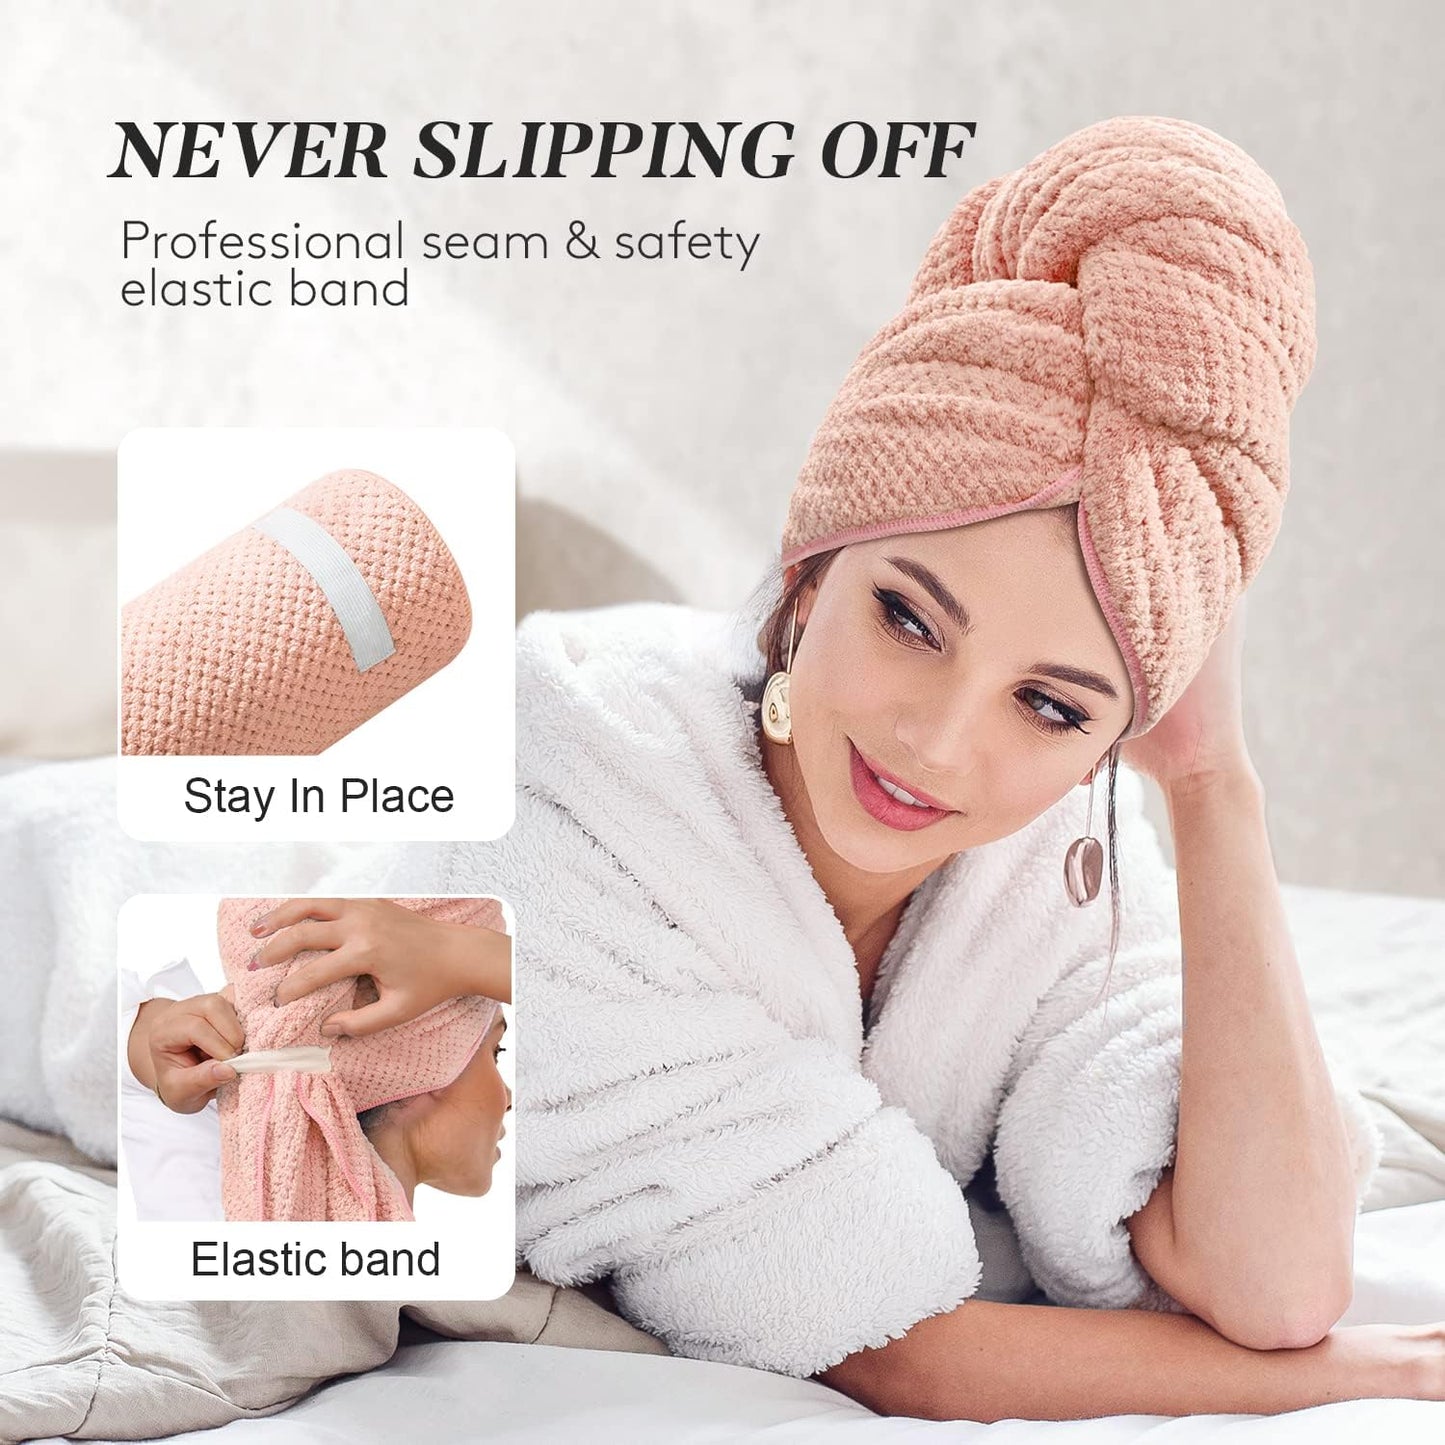 Large Microfiber Hair Towel Wrap for Women, Super Absorbent Hair Drying Towel with Elastic Strap, Anti Frizz Fast Drying Hair Turbans for Long, Thick, Curly Hair, Soft Hair Wrap Towels Pink